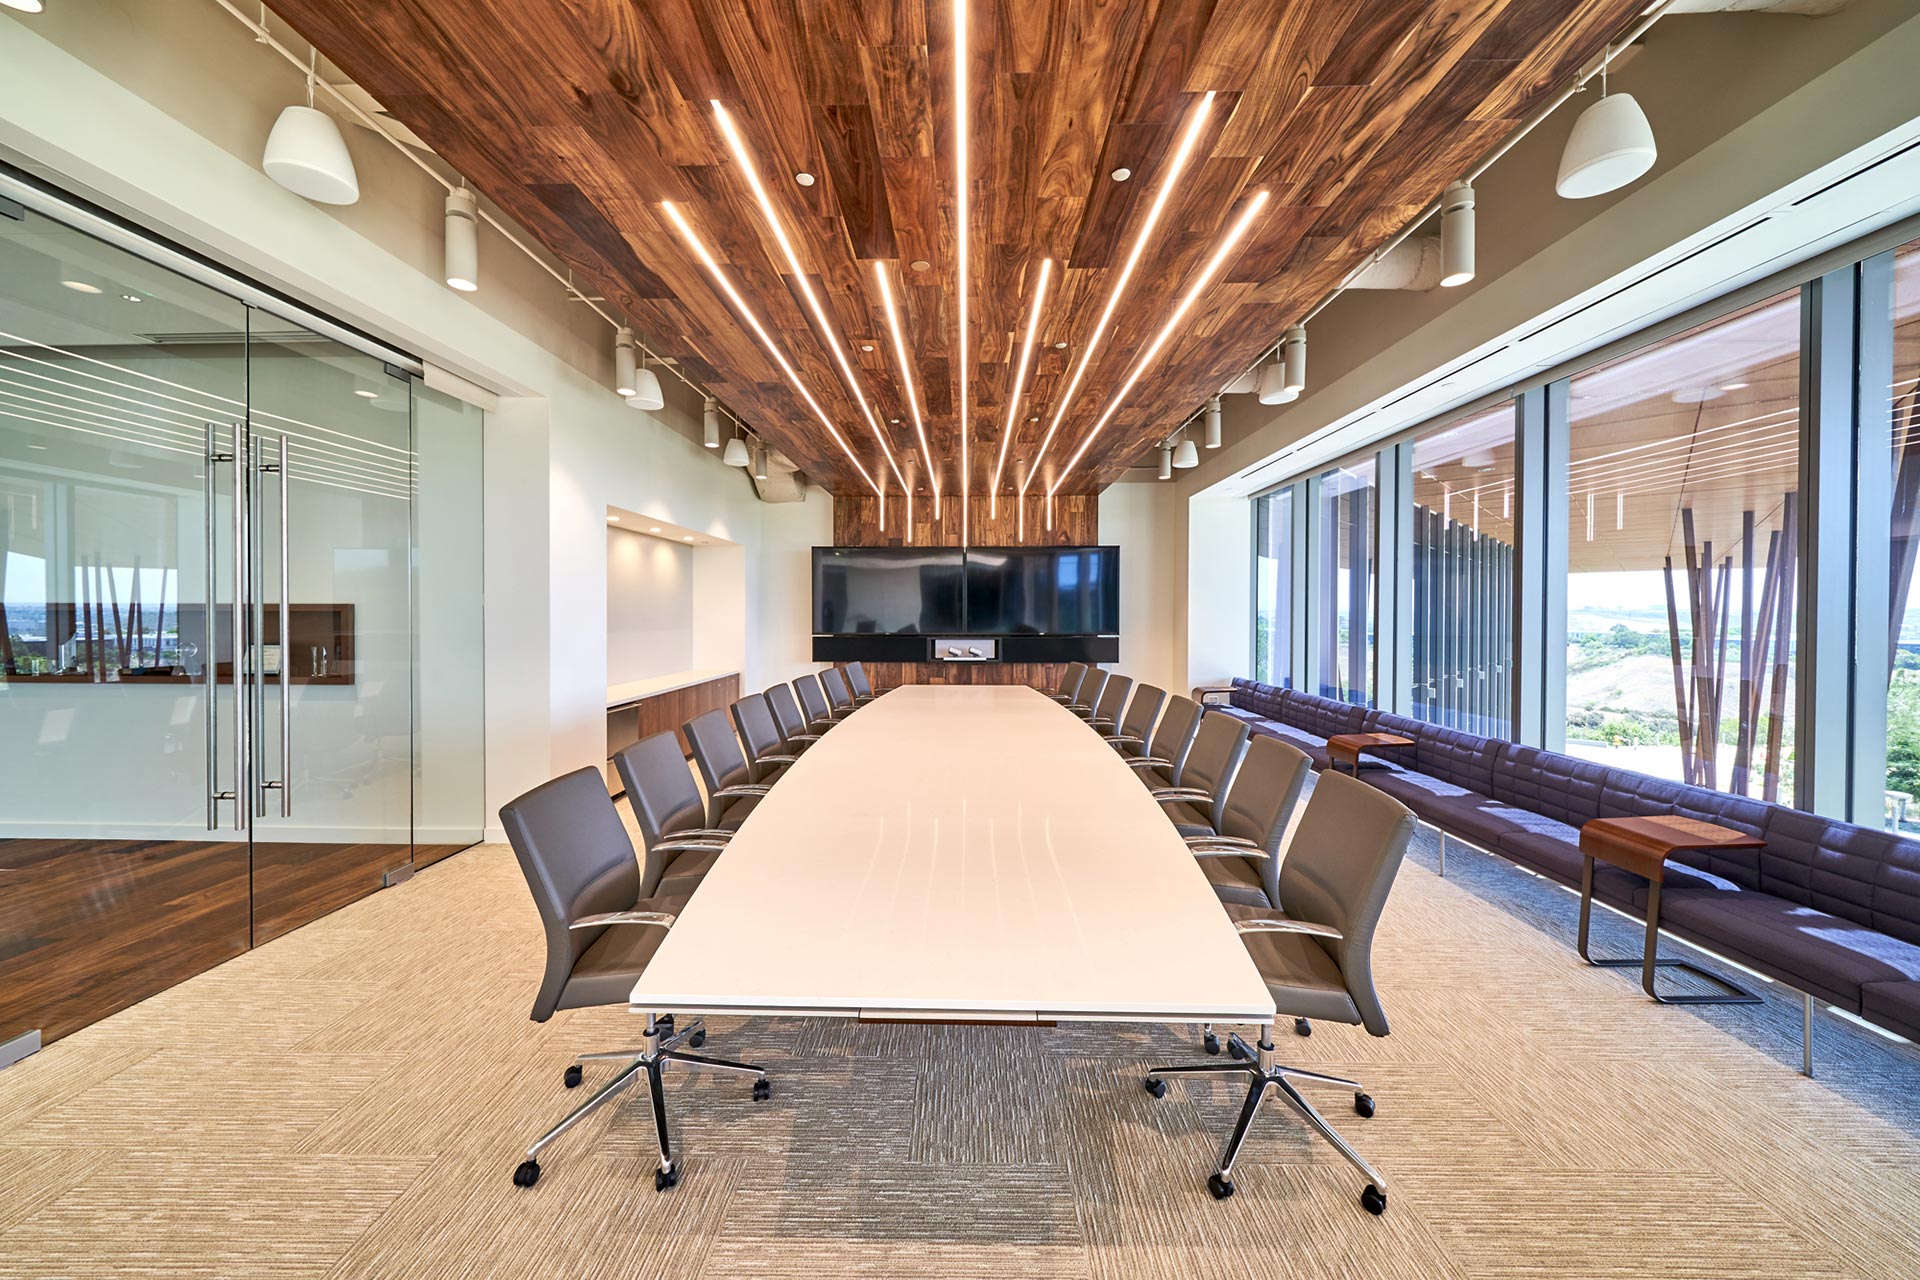 Interior at Vertex Pharmaceuticals life science facility, conference room with long conference table and screens